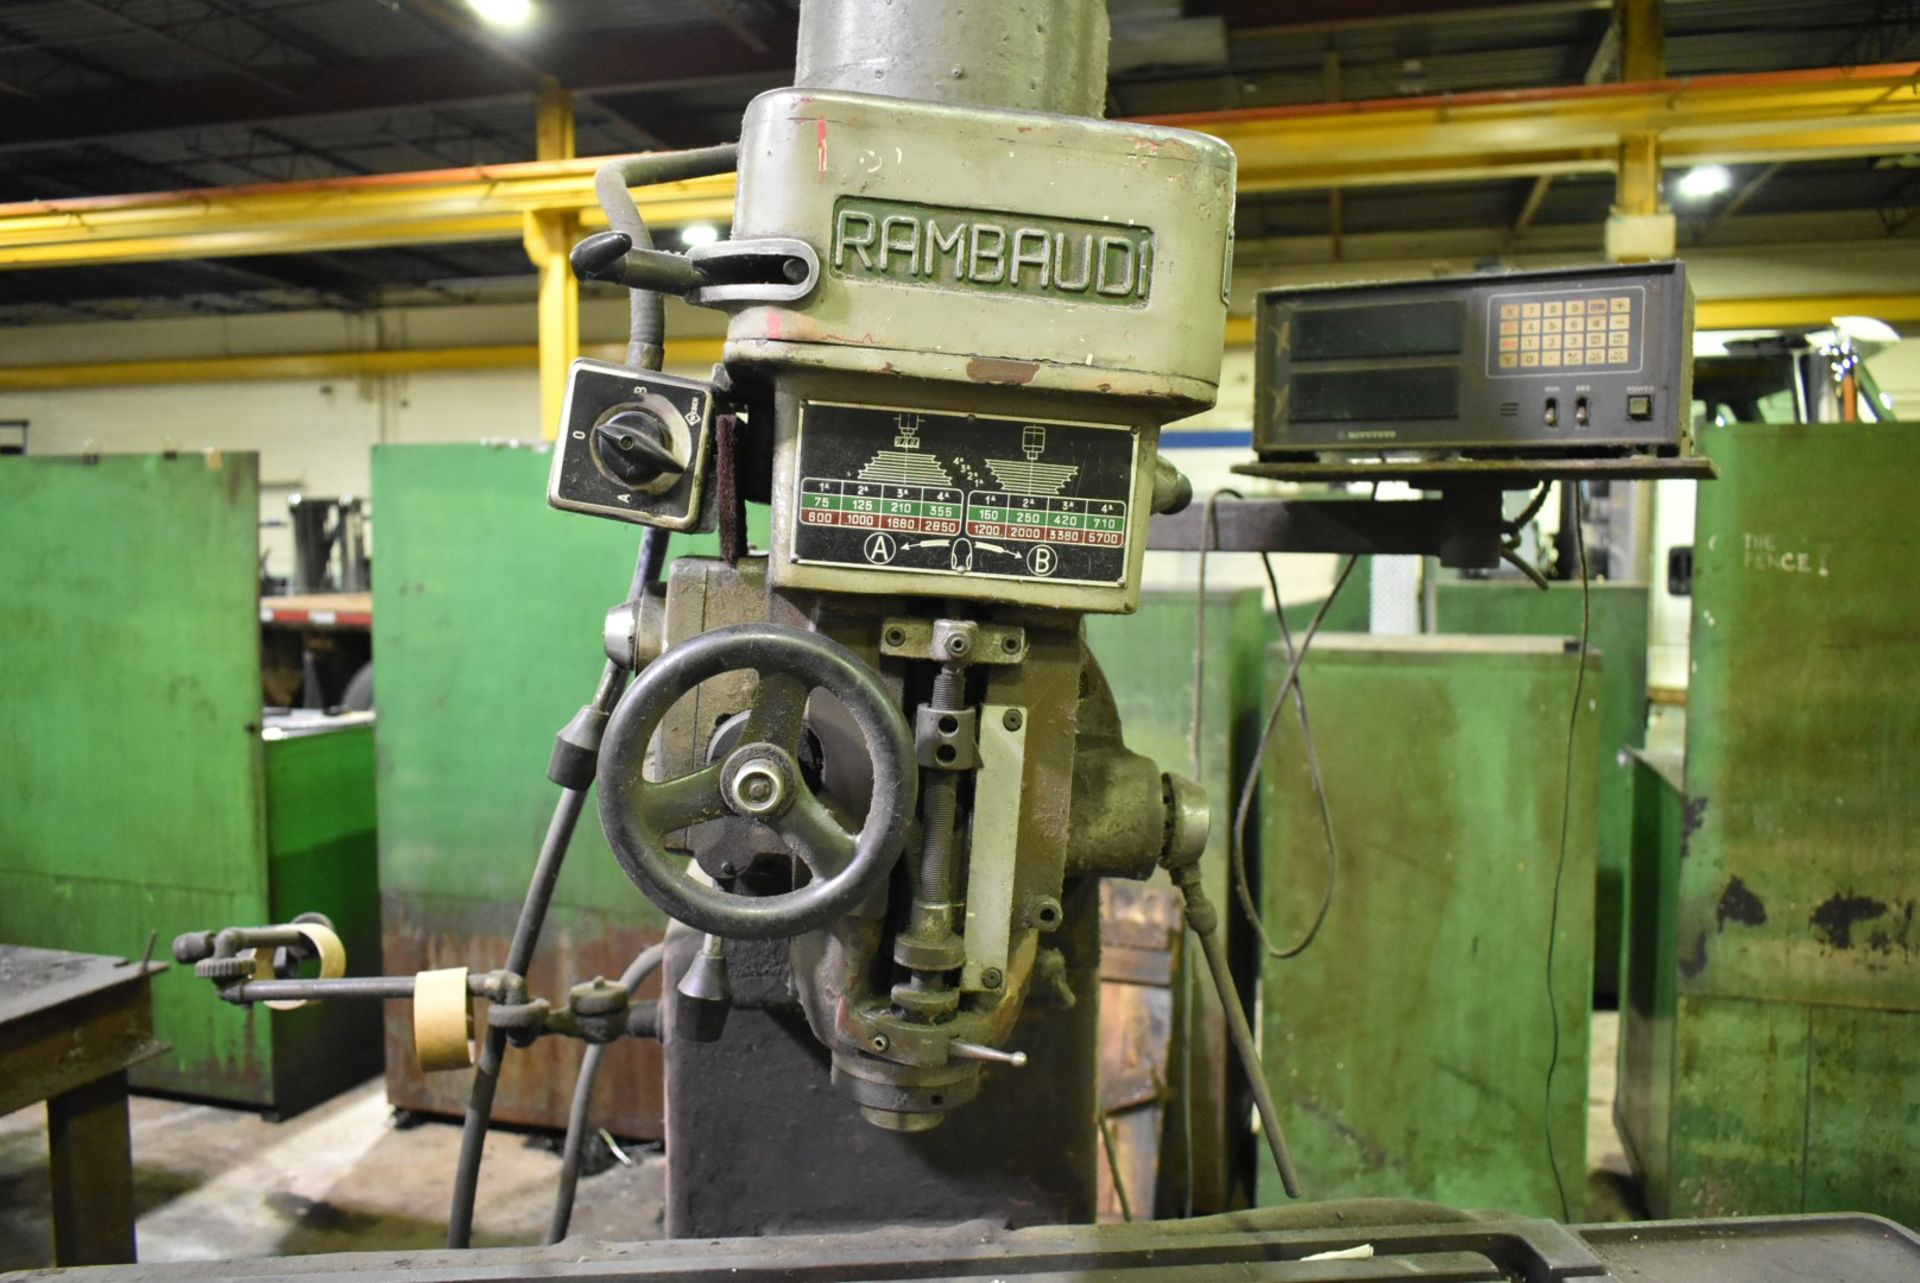 RAMBAUDI V2 VERTICAL MILLING MACHINE WITH 12"X42" TABLE, SPEEDS TO 5100 RPM, MITUTOYO 2-AXIS DRO, - Image 5 of 6